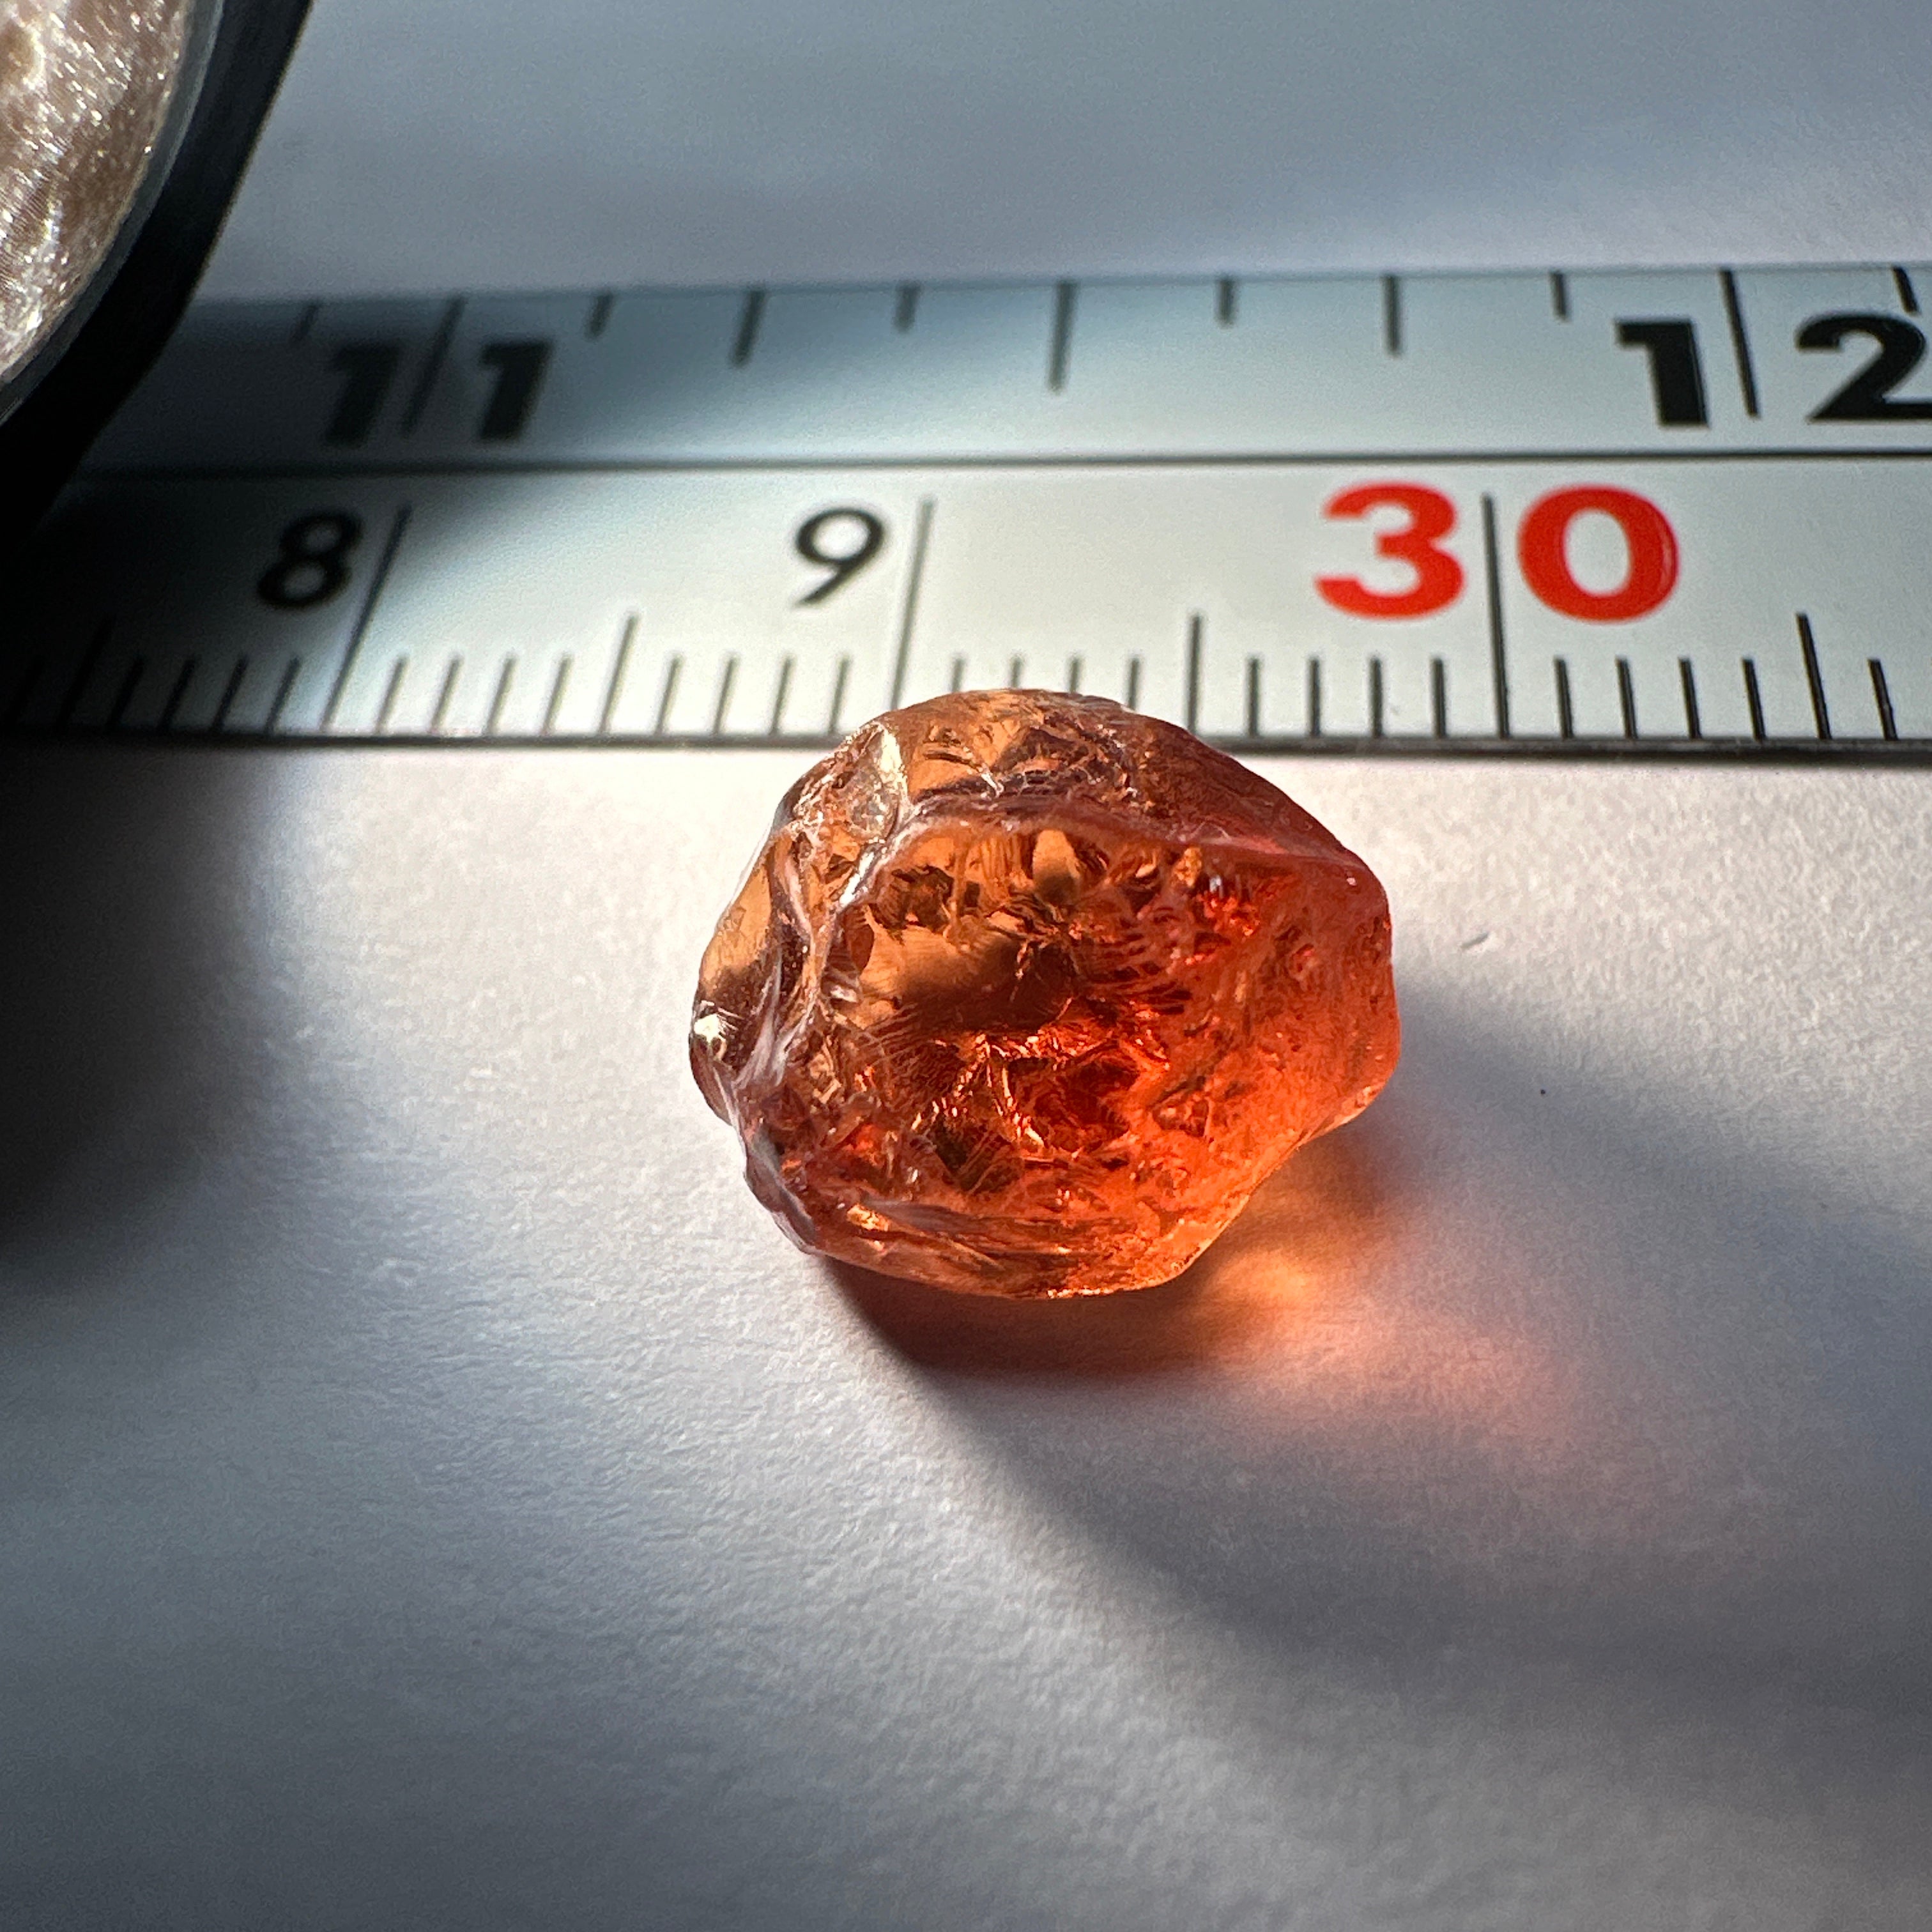 4.77ct Colour Change Garnet, Tanzania, Untreated Unheated, vvs-if with a very slight inclusion on the skin on the outside